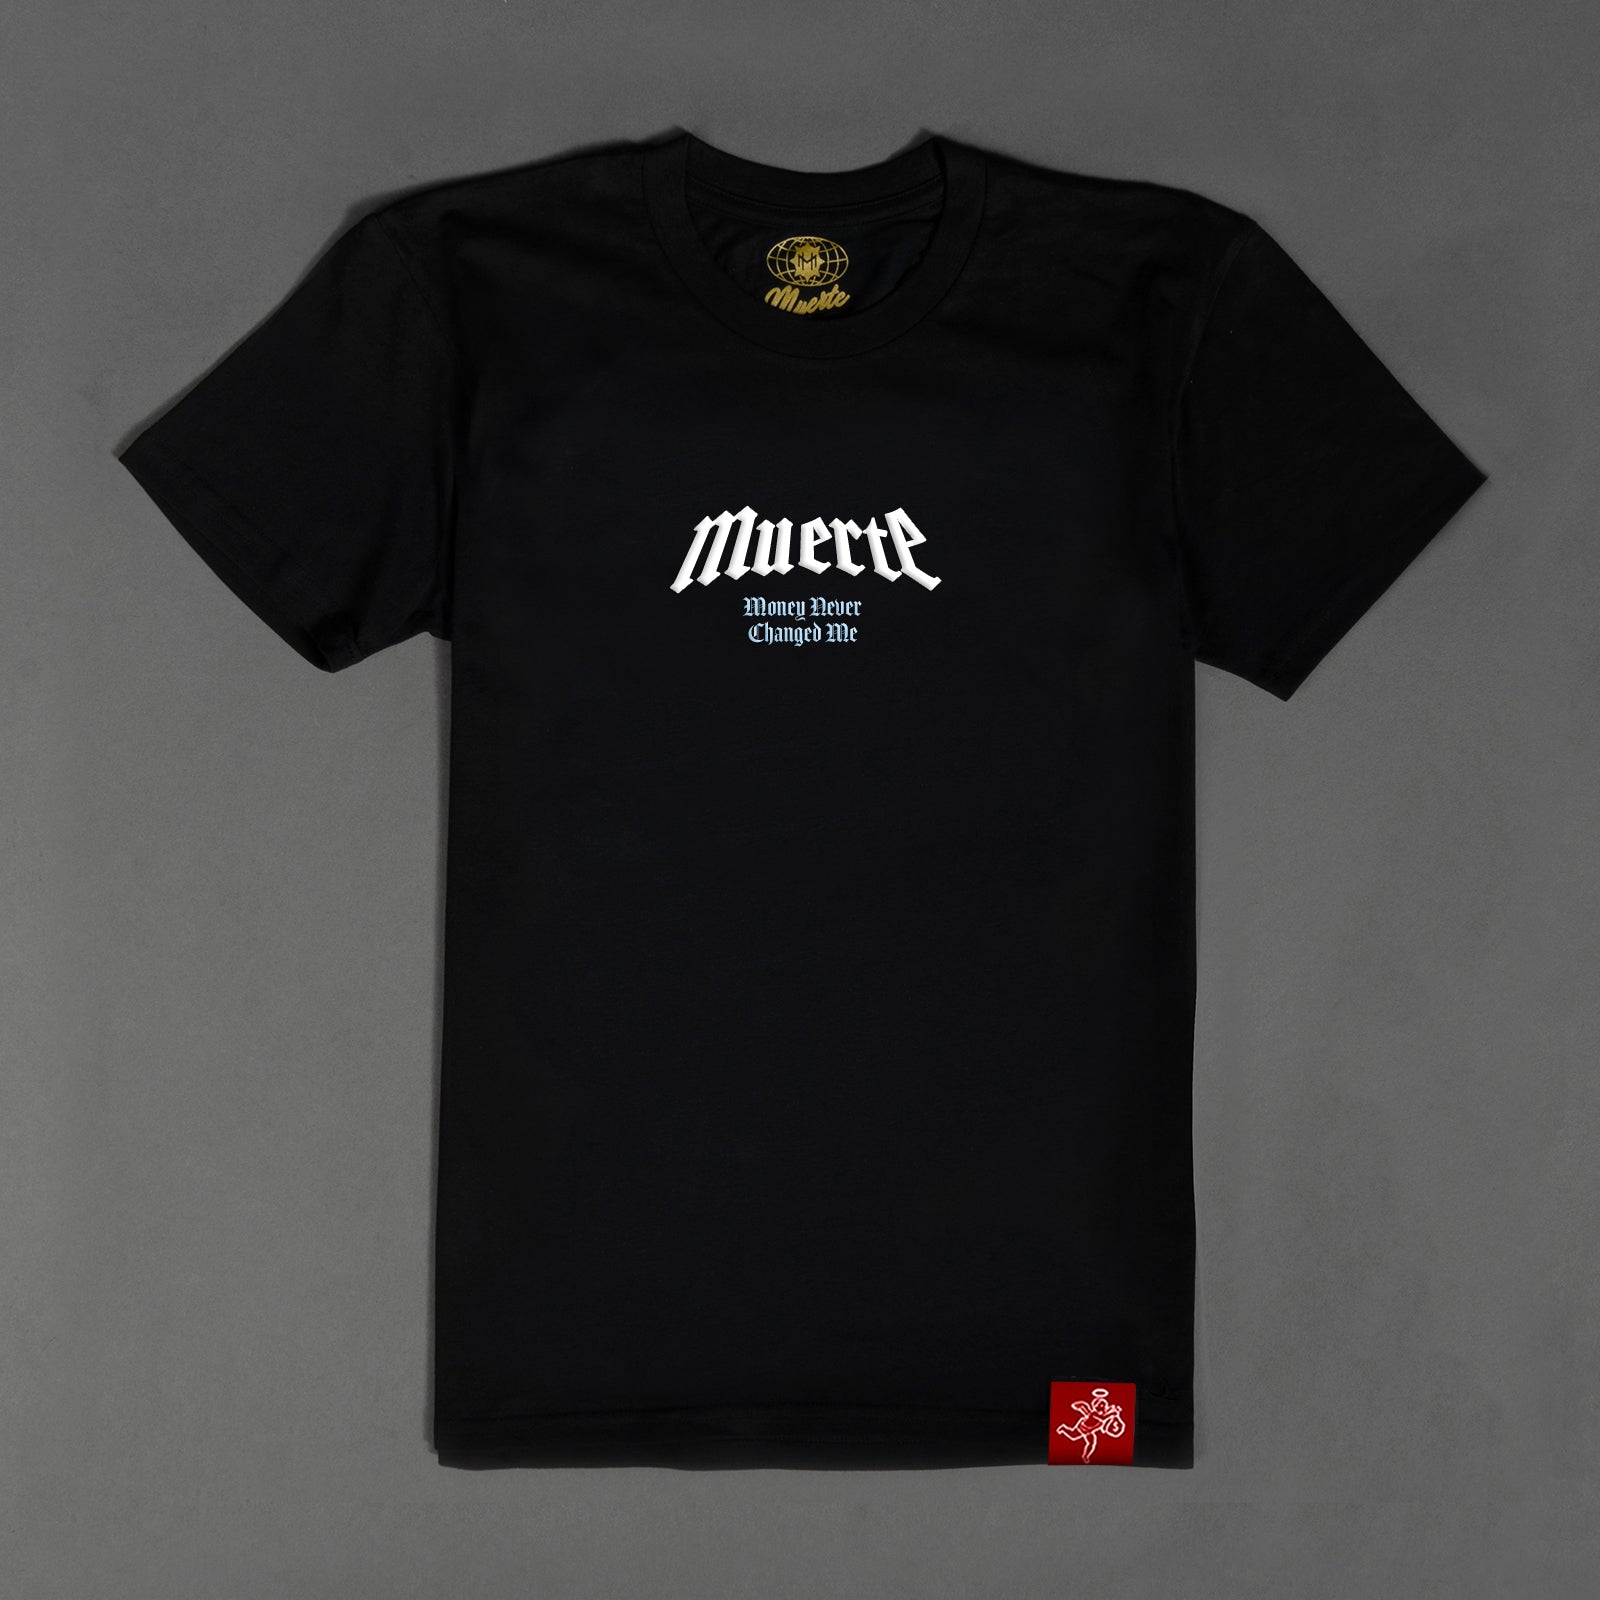 Money Never Changed Me Wolf - ULTRA HW Red Label Tee - Black